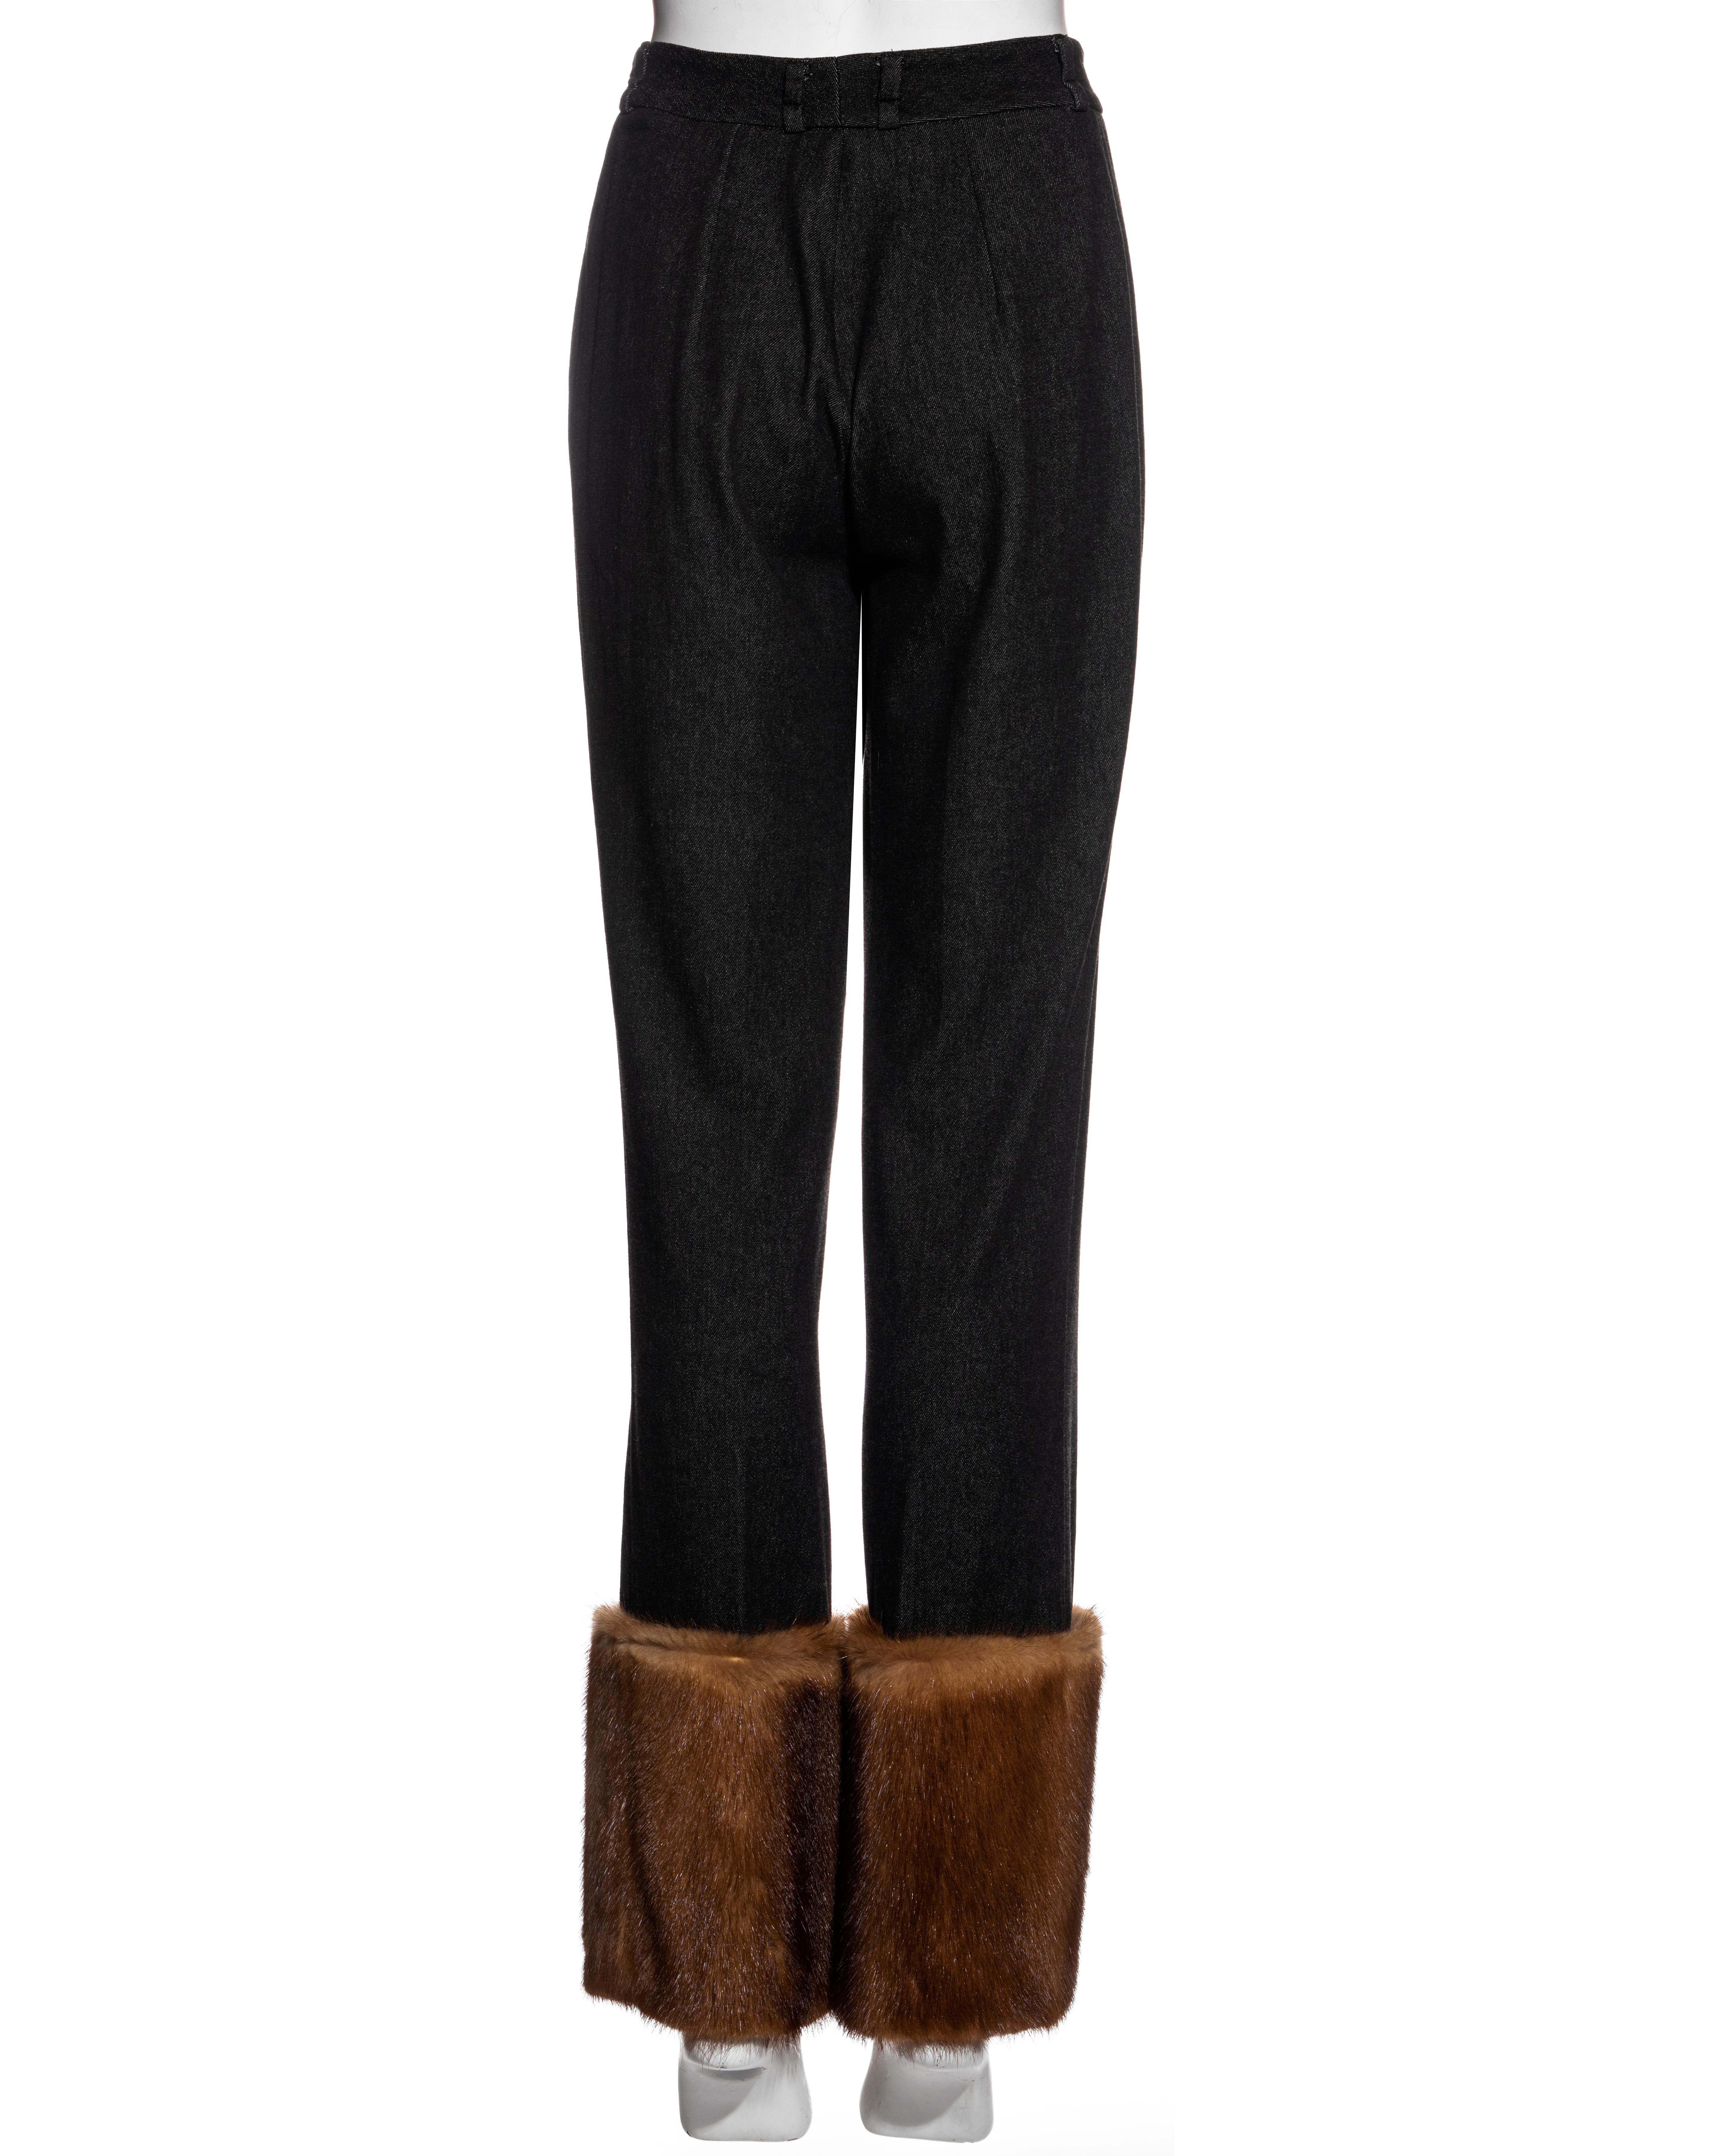 Dolce & Gabbana black denim and mink fur pants, fw 1999 In Excellent Condition For Sale In London, GB